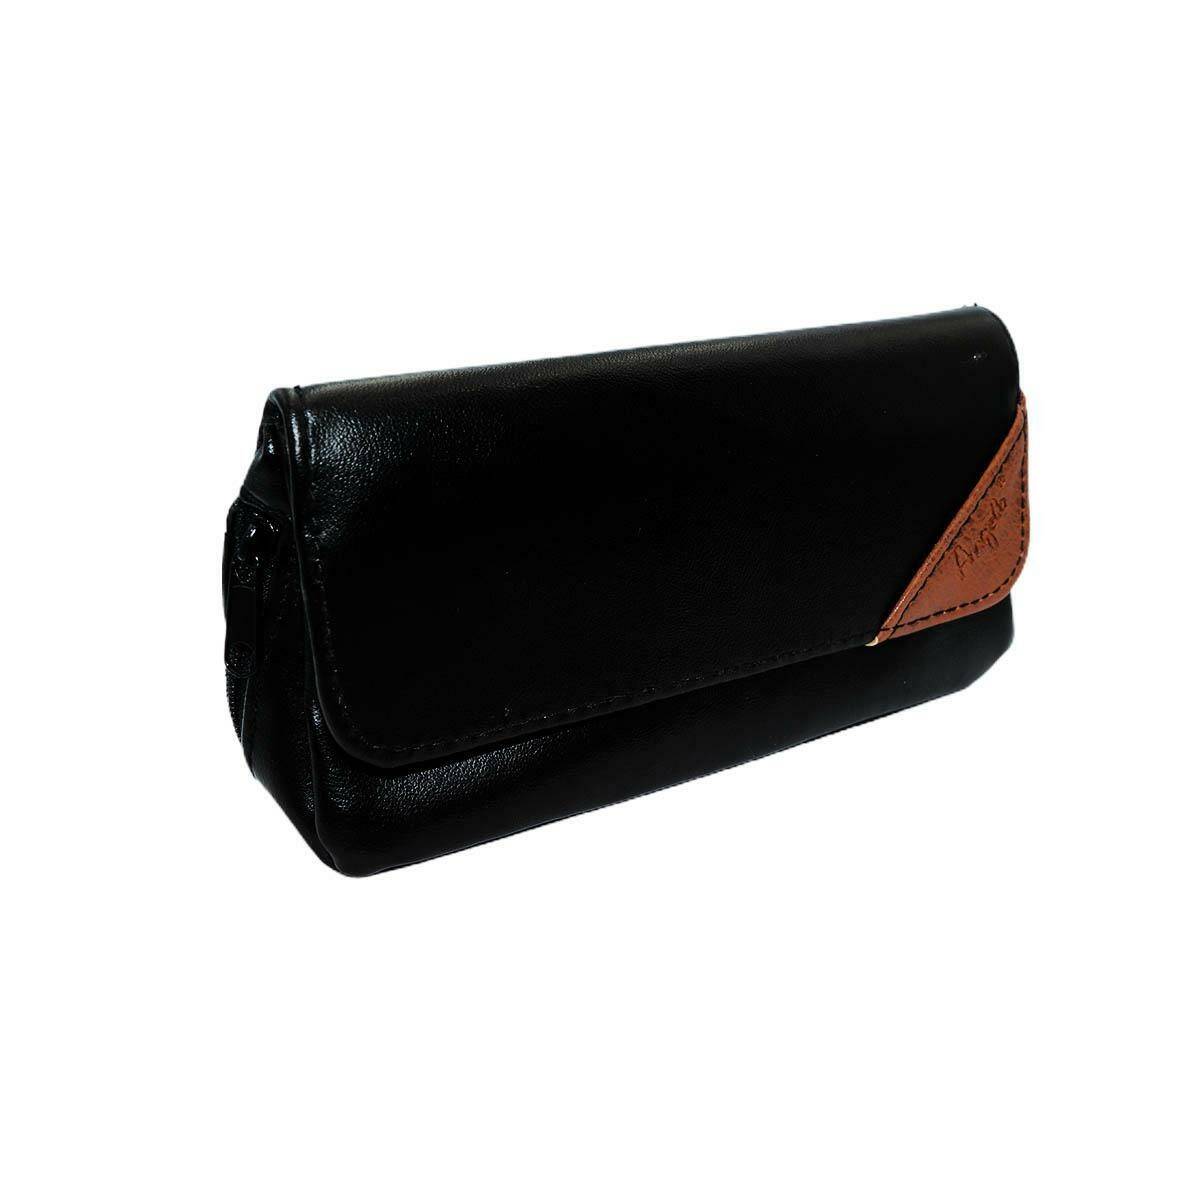 Case for 2 Pipes and Tobacco - Black/Brown